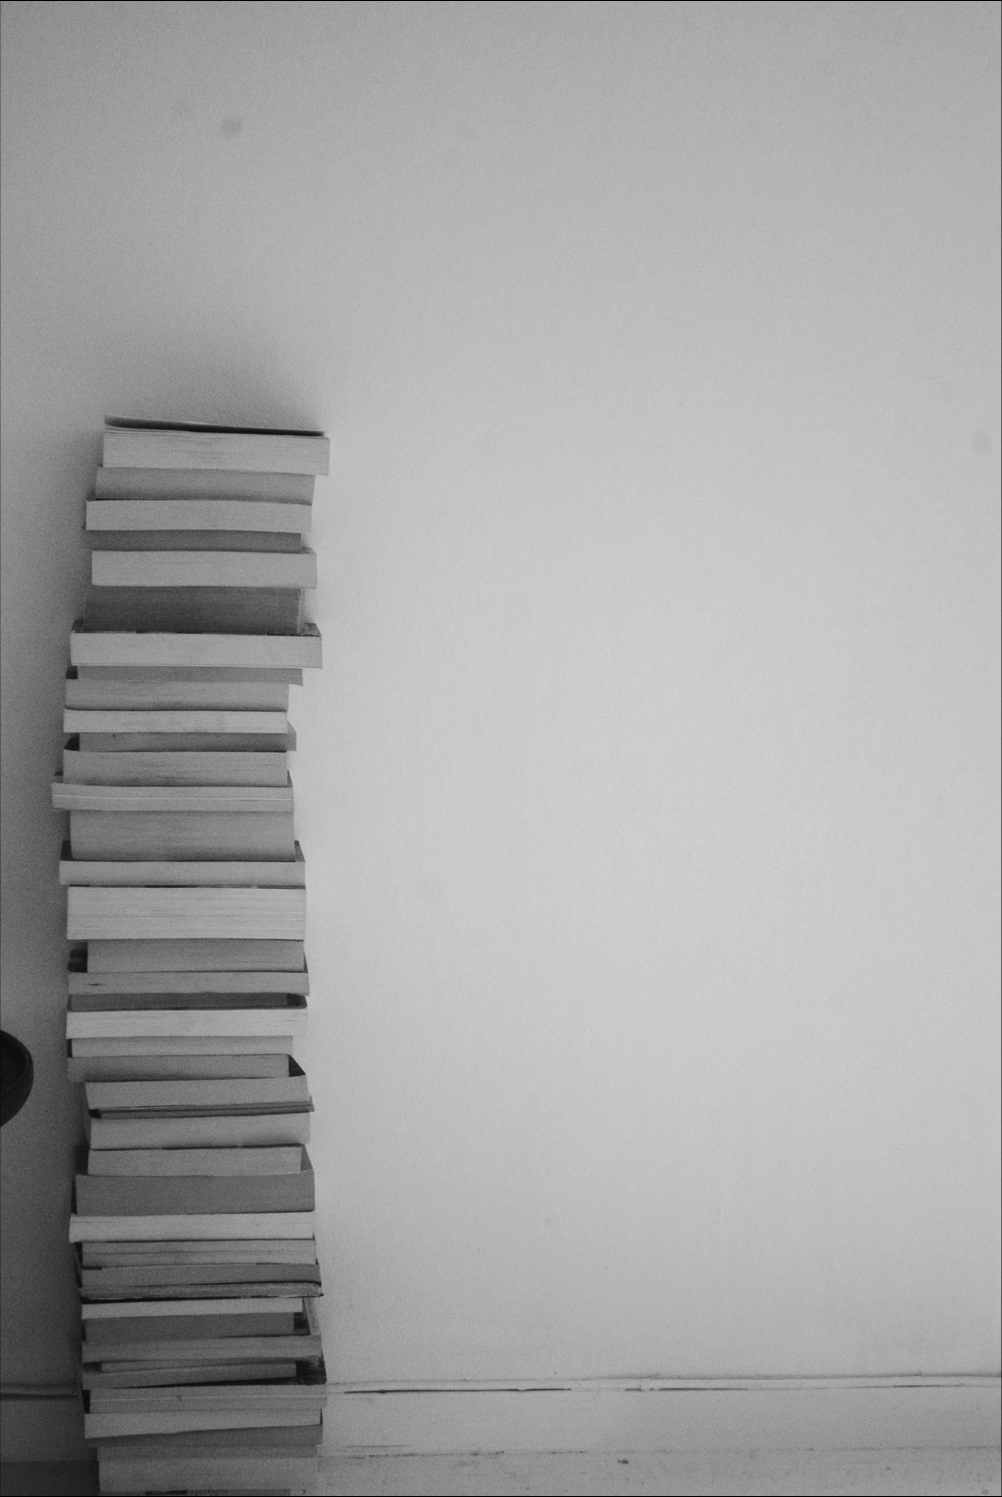 A stack of books sitting on top shelf - Gray